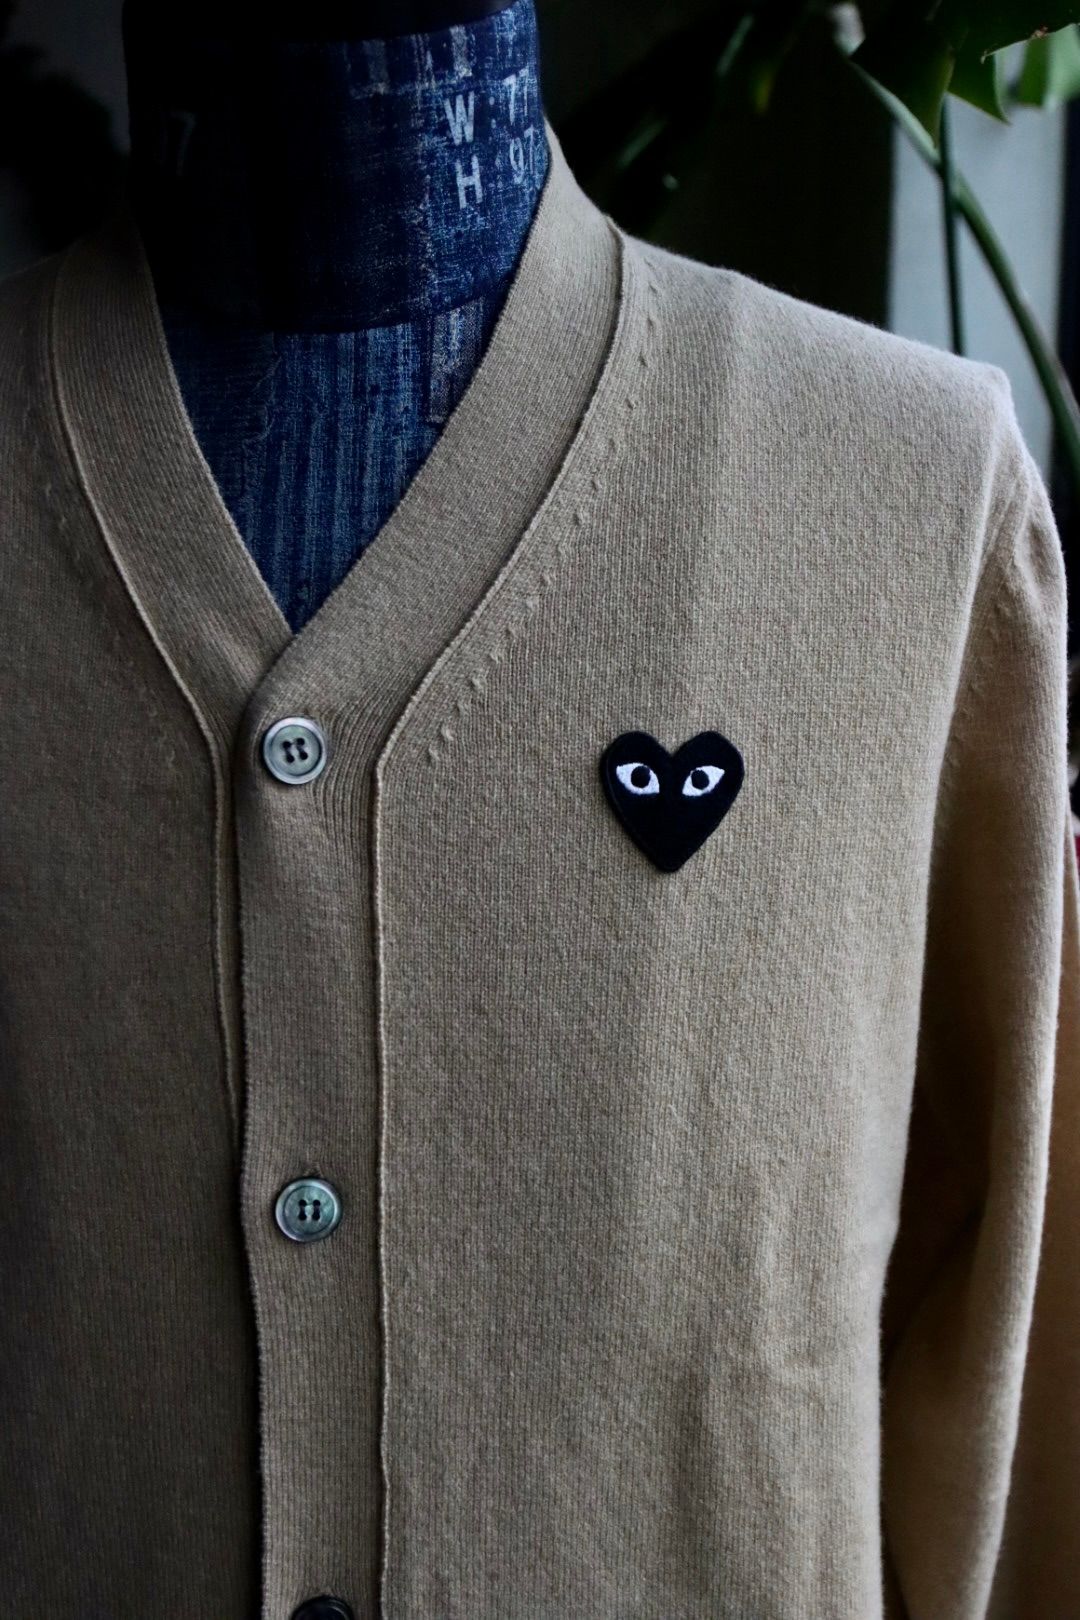 PLAY COMME des GARCONS - プレイコムデギャルソン PLAY CARDIGAN 